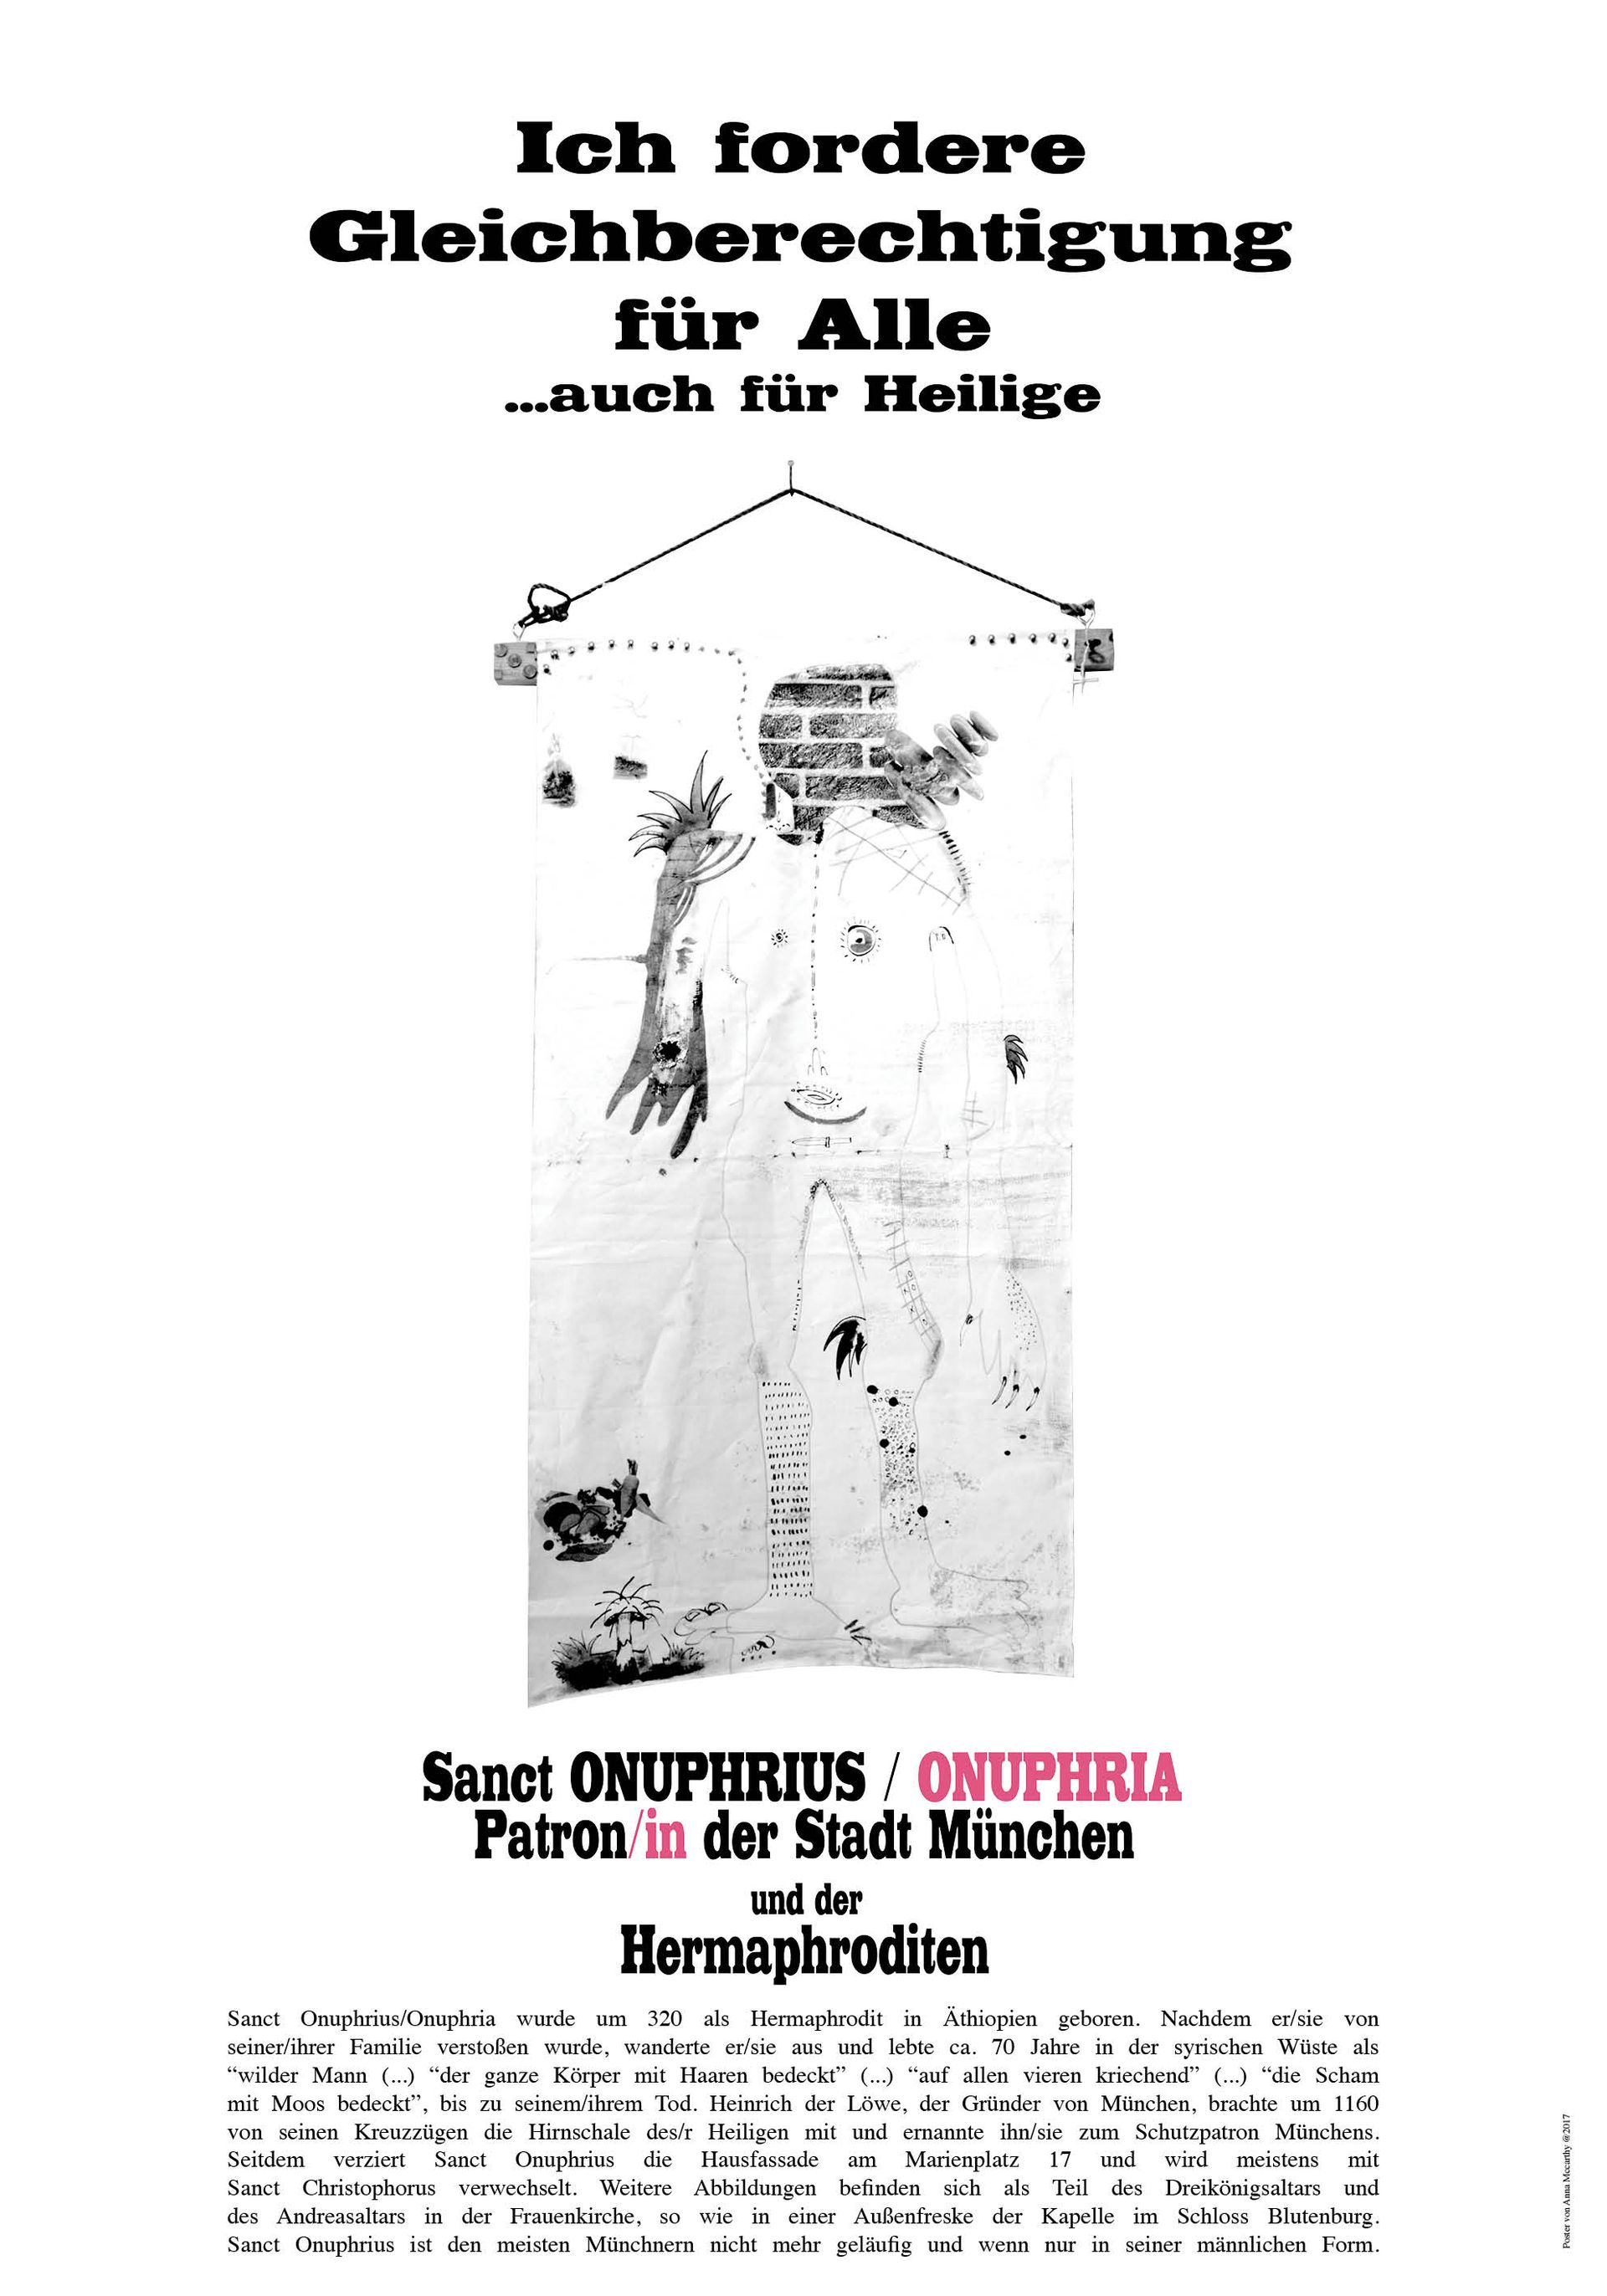 Poster for the archive of the Forum Homosexualität München within the framework of Philip Guflers’ exhibition and publication “I wanna give you devotion” in collaboration with Hamman & Von Mier Verlag